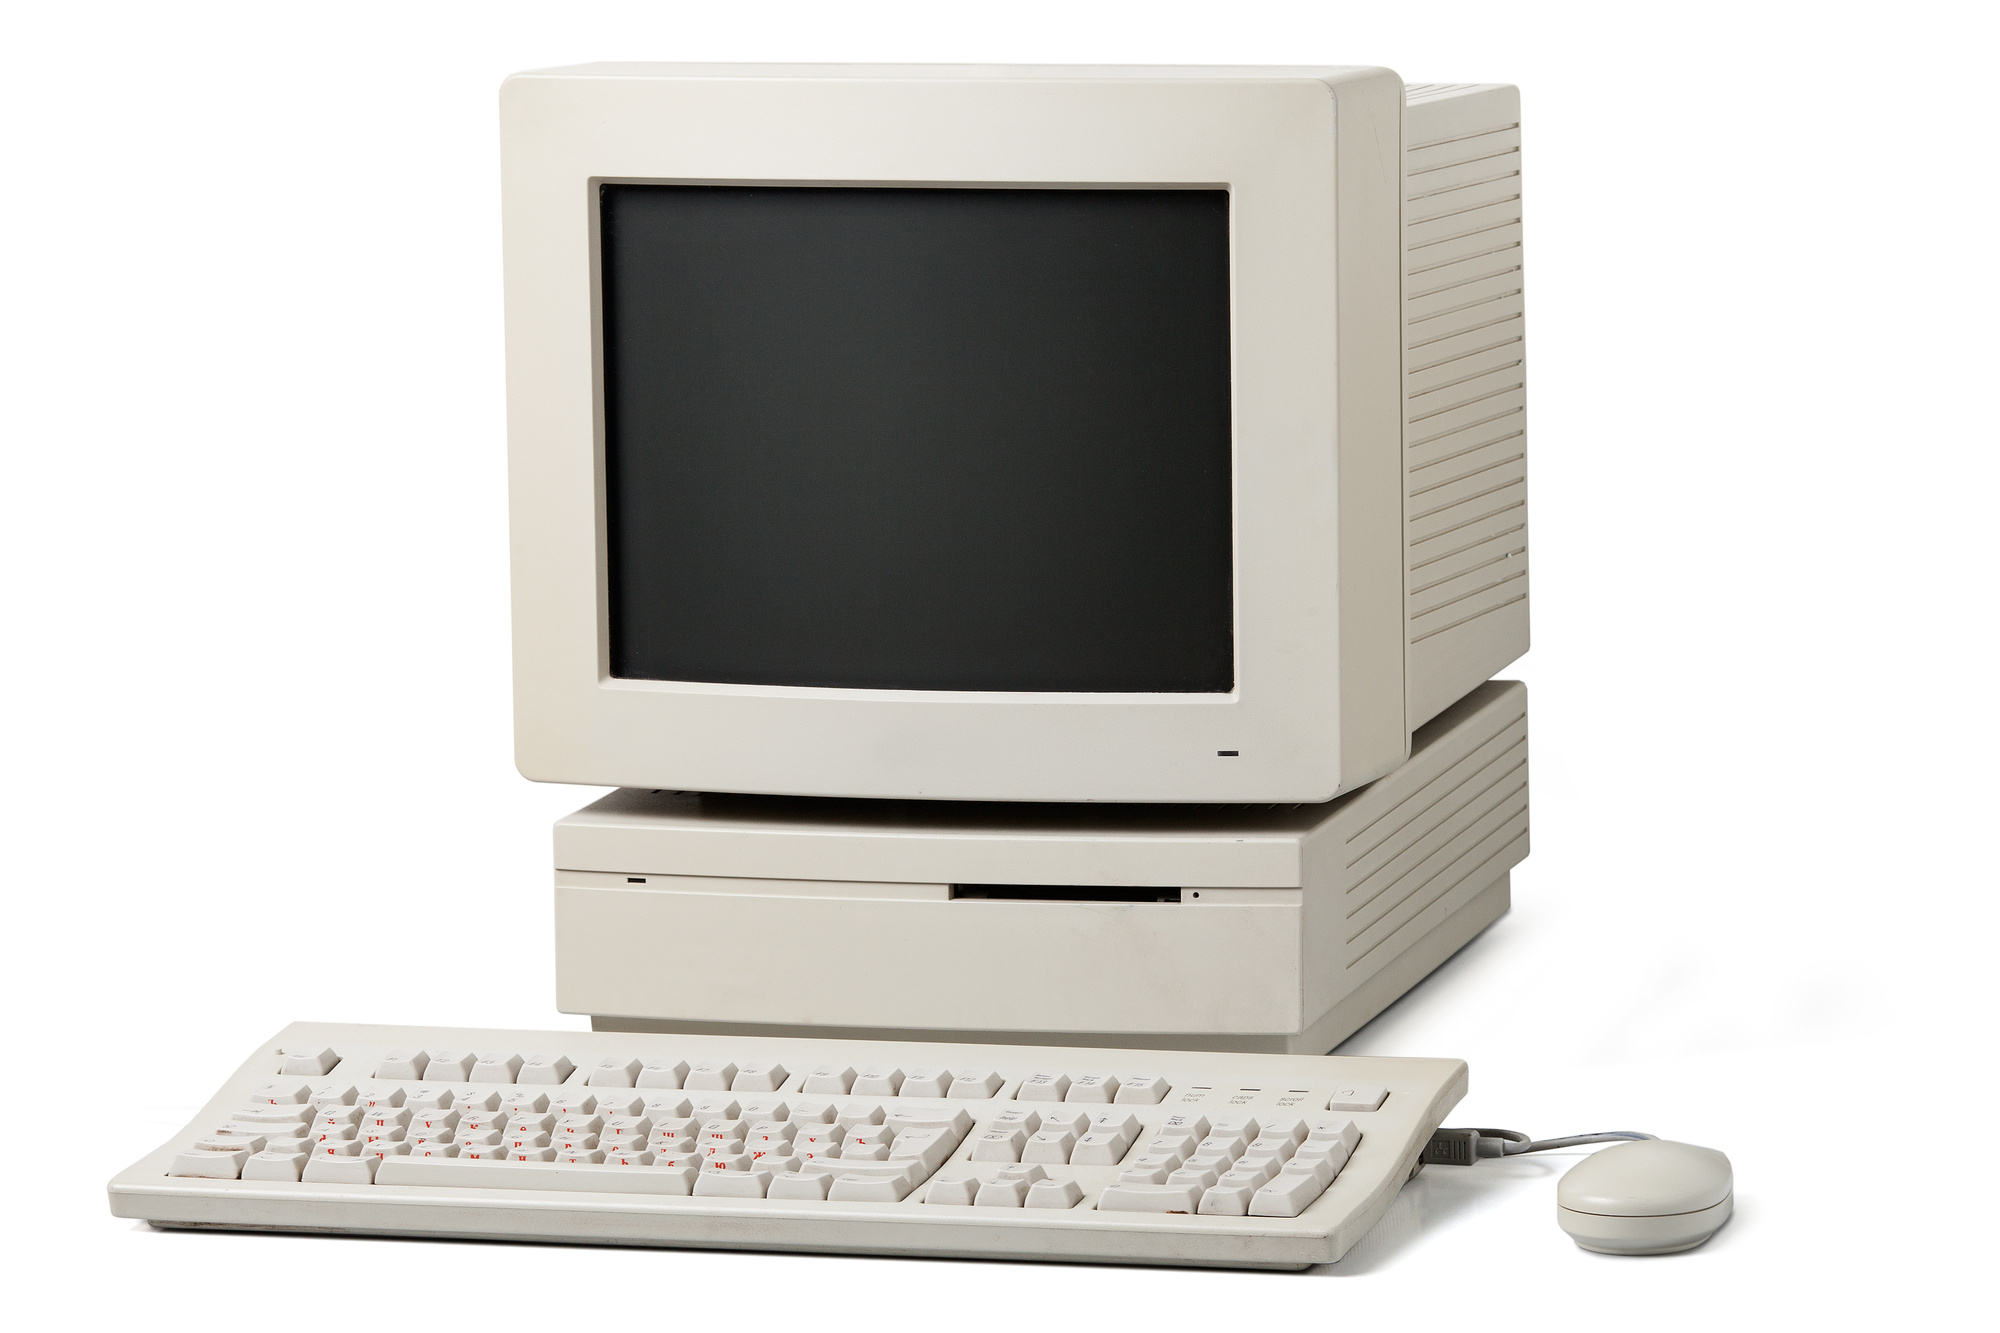 Old personal computer. The system unit, monitor, keyboard and mouse isolated on white background.